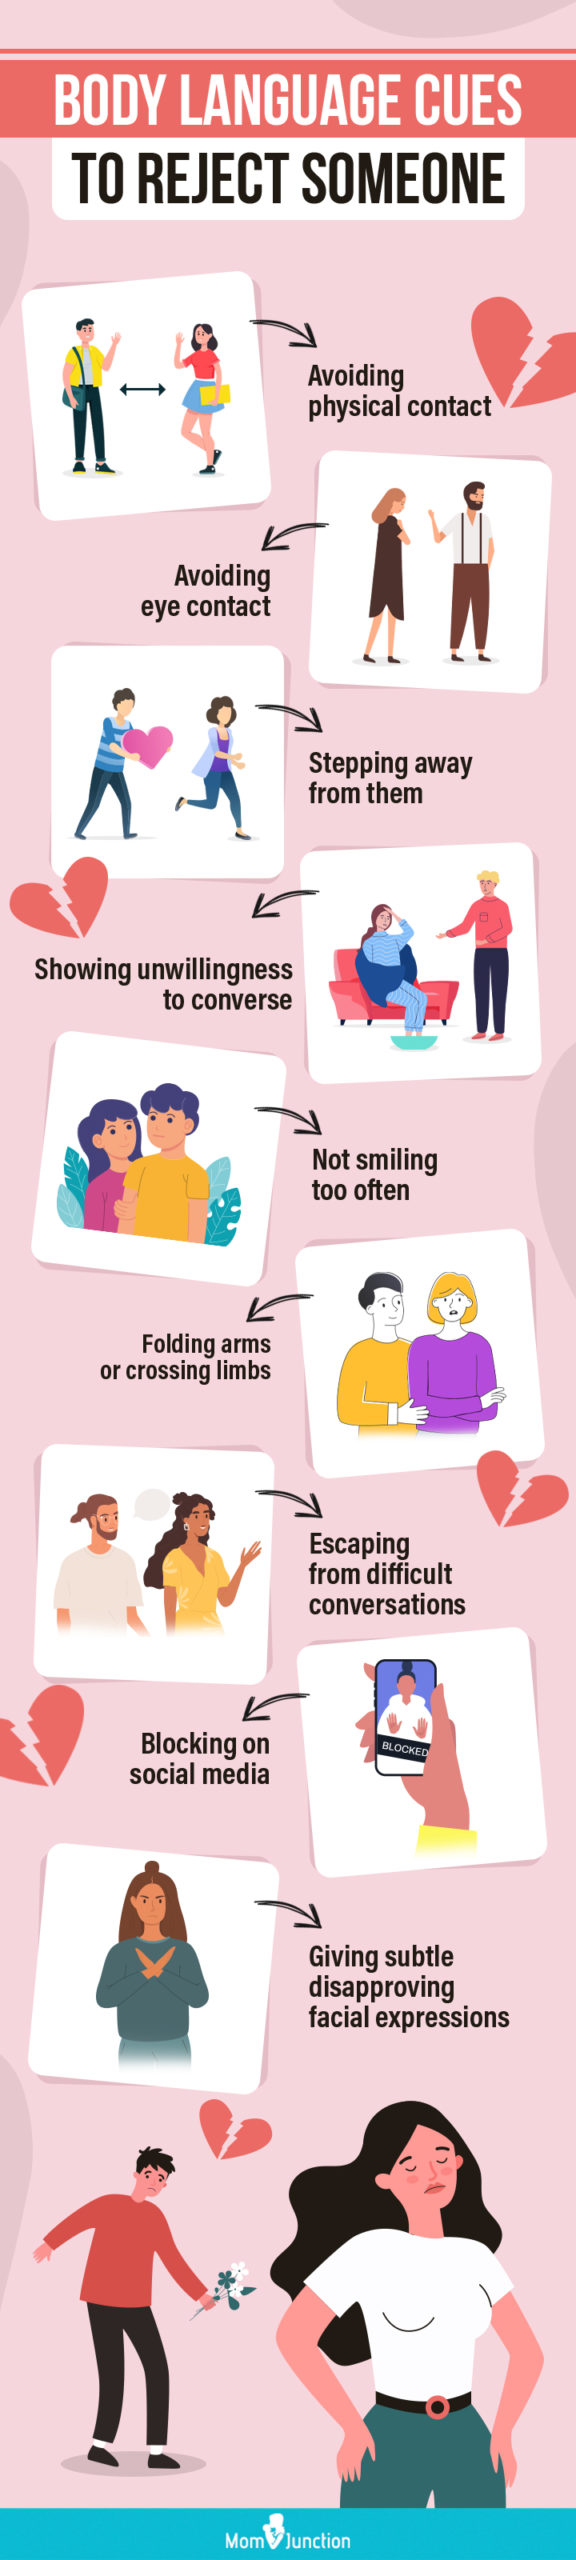 body language cues to reject someone (infographic)